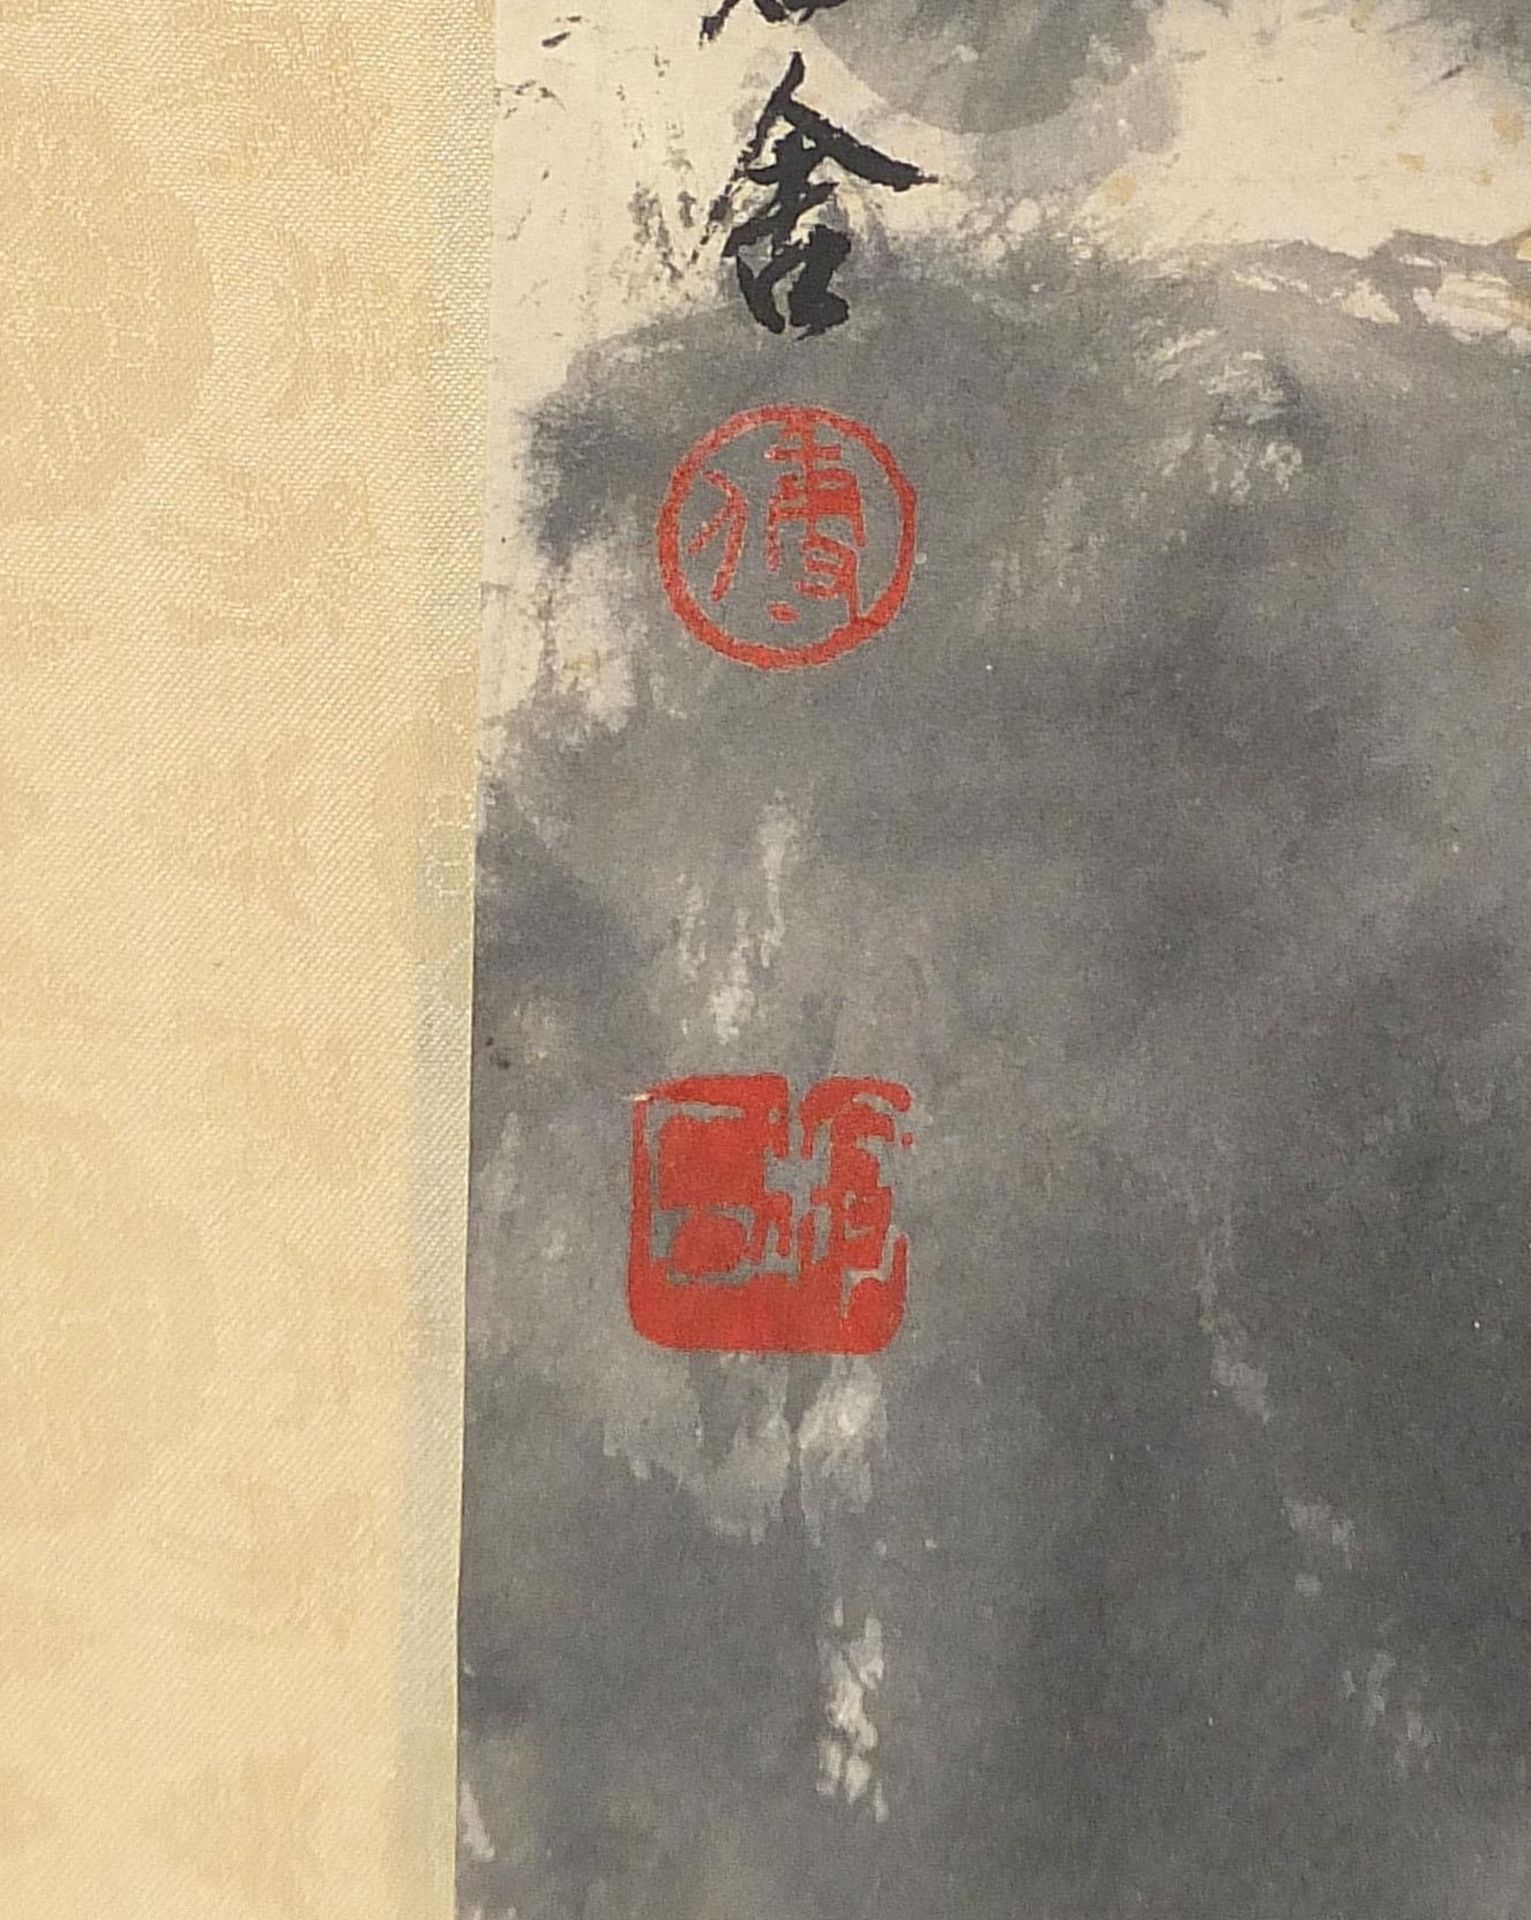 Attributed to Fu Baoshi - Female celestial spreading auspiciousness with inscribed poem attributed - Image 6 of 7